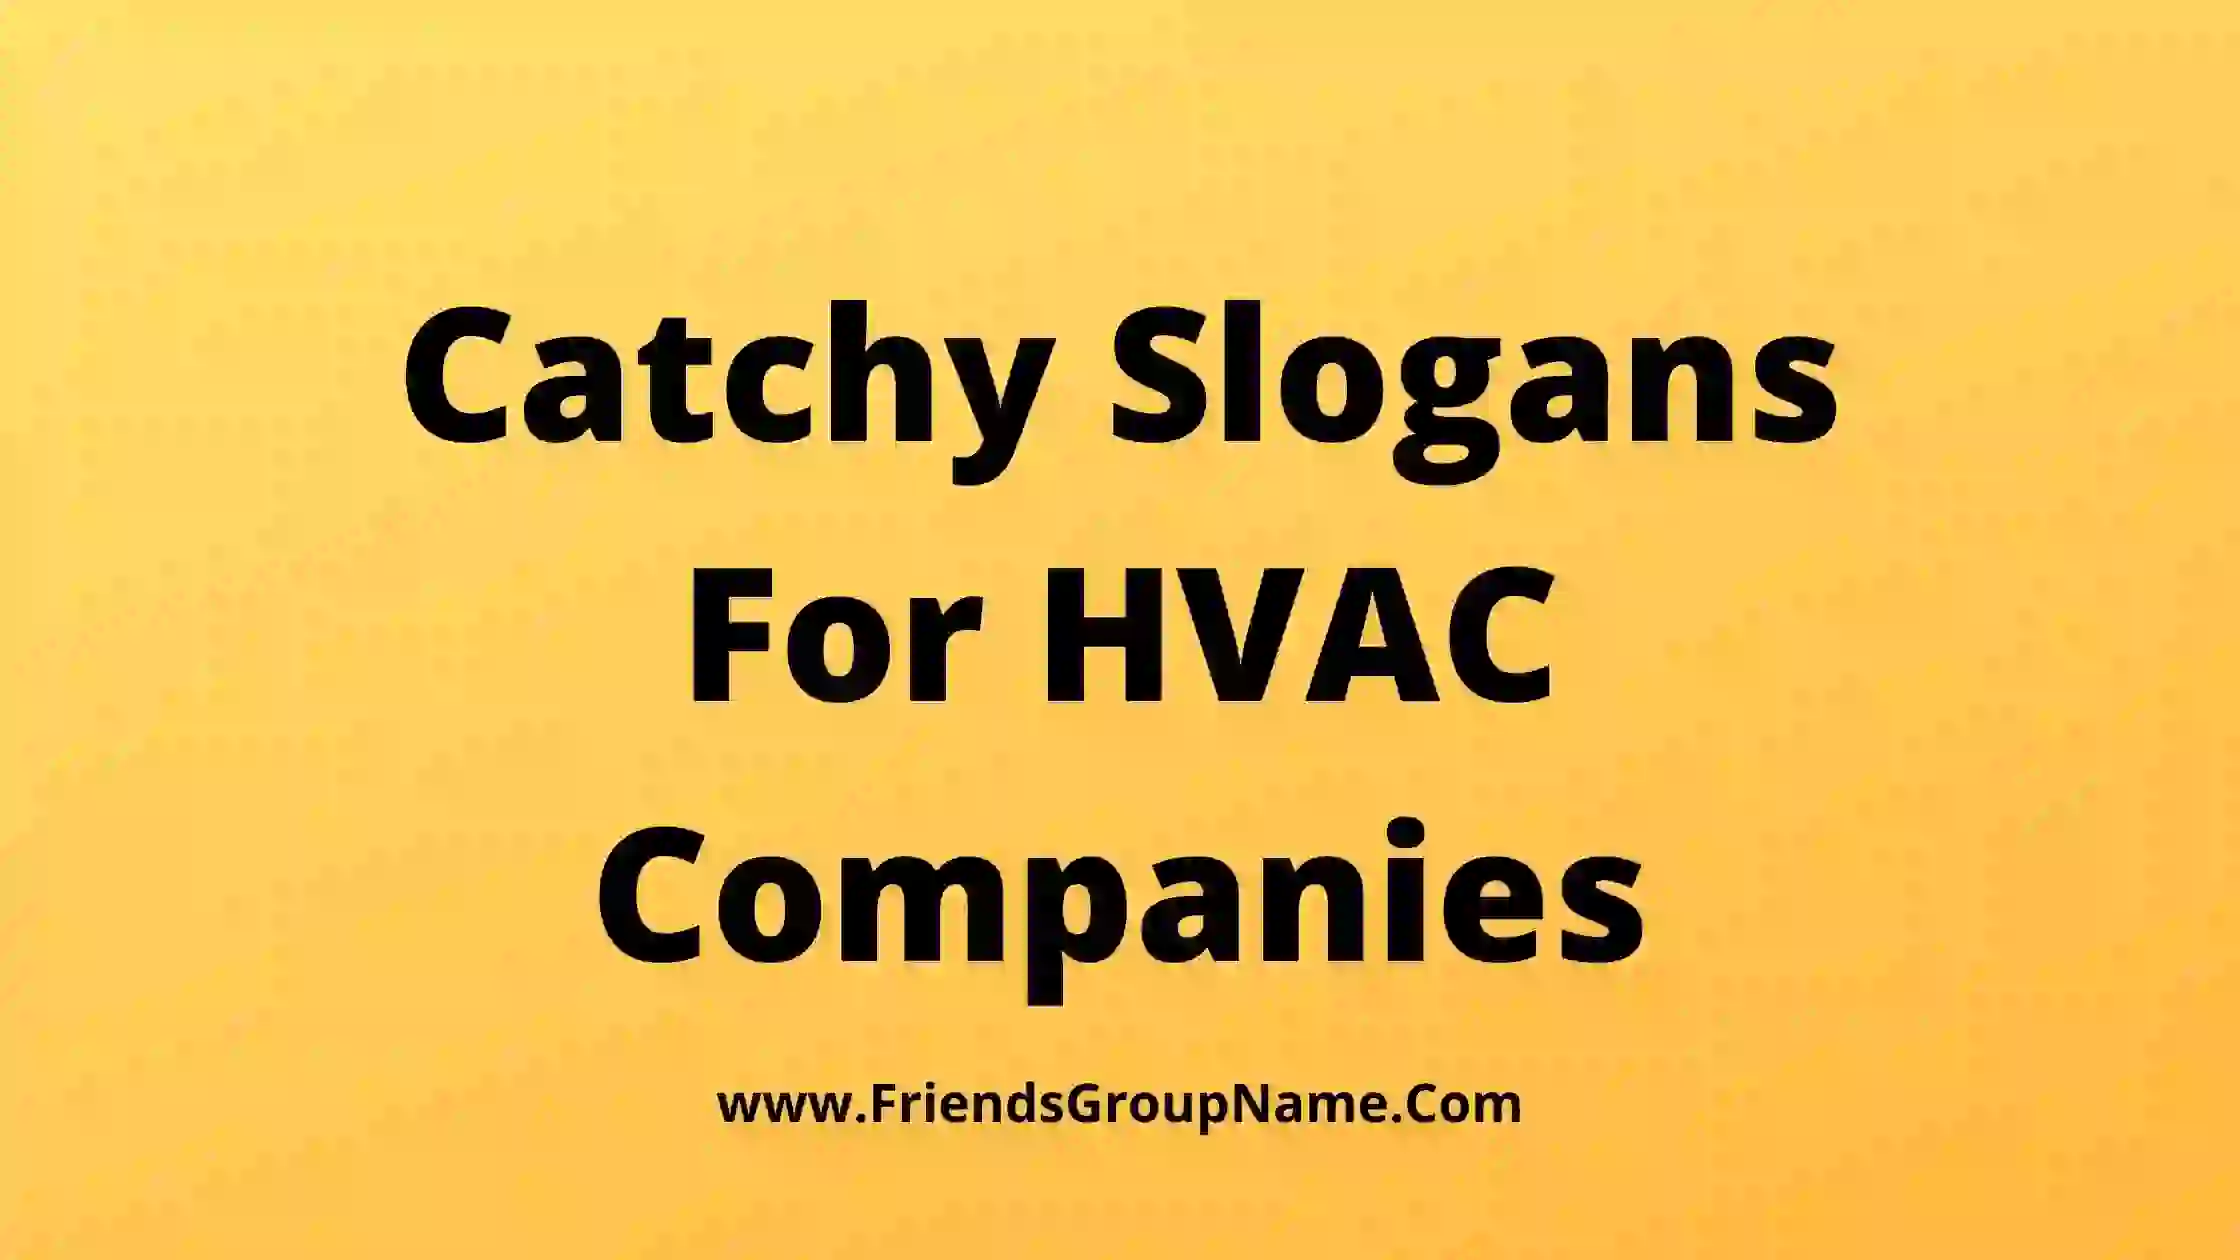 Catchy Slogans For HVAC Companies